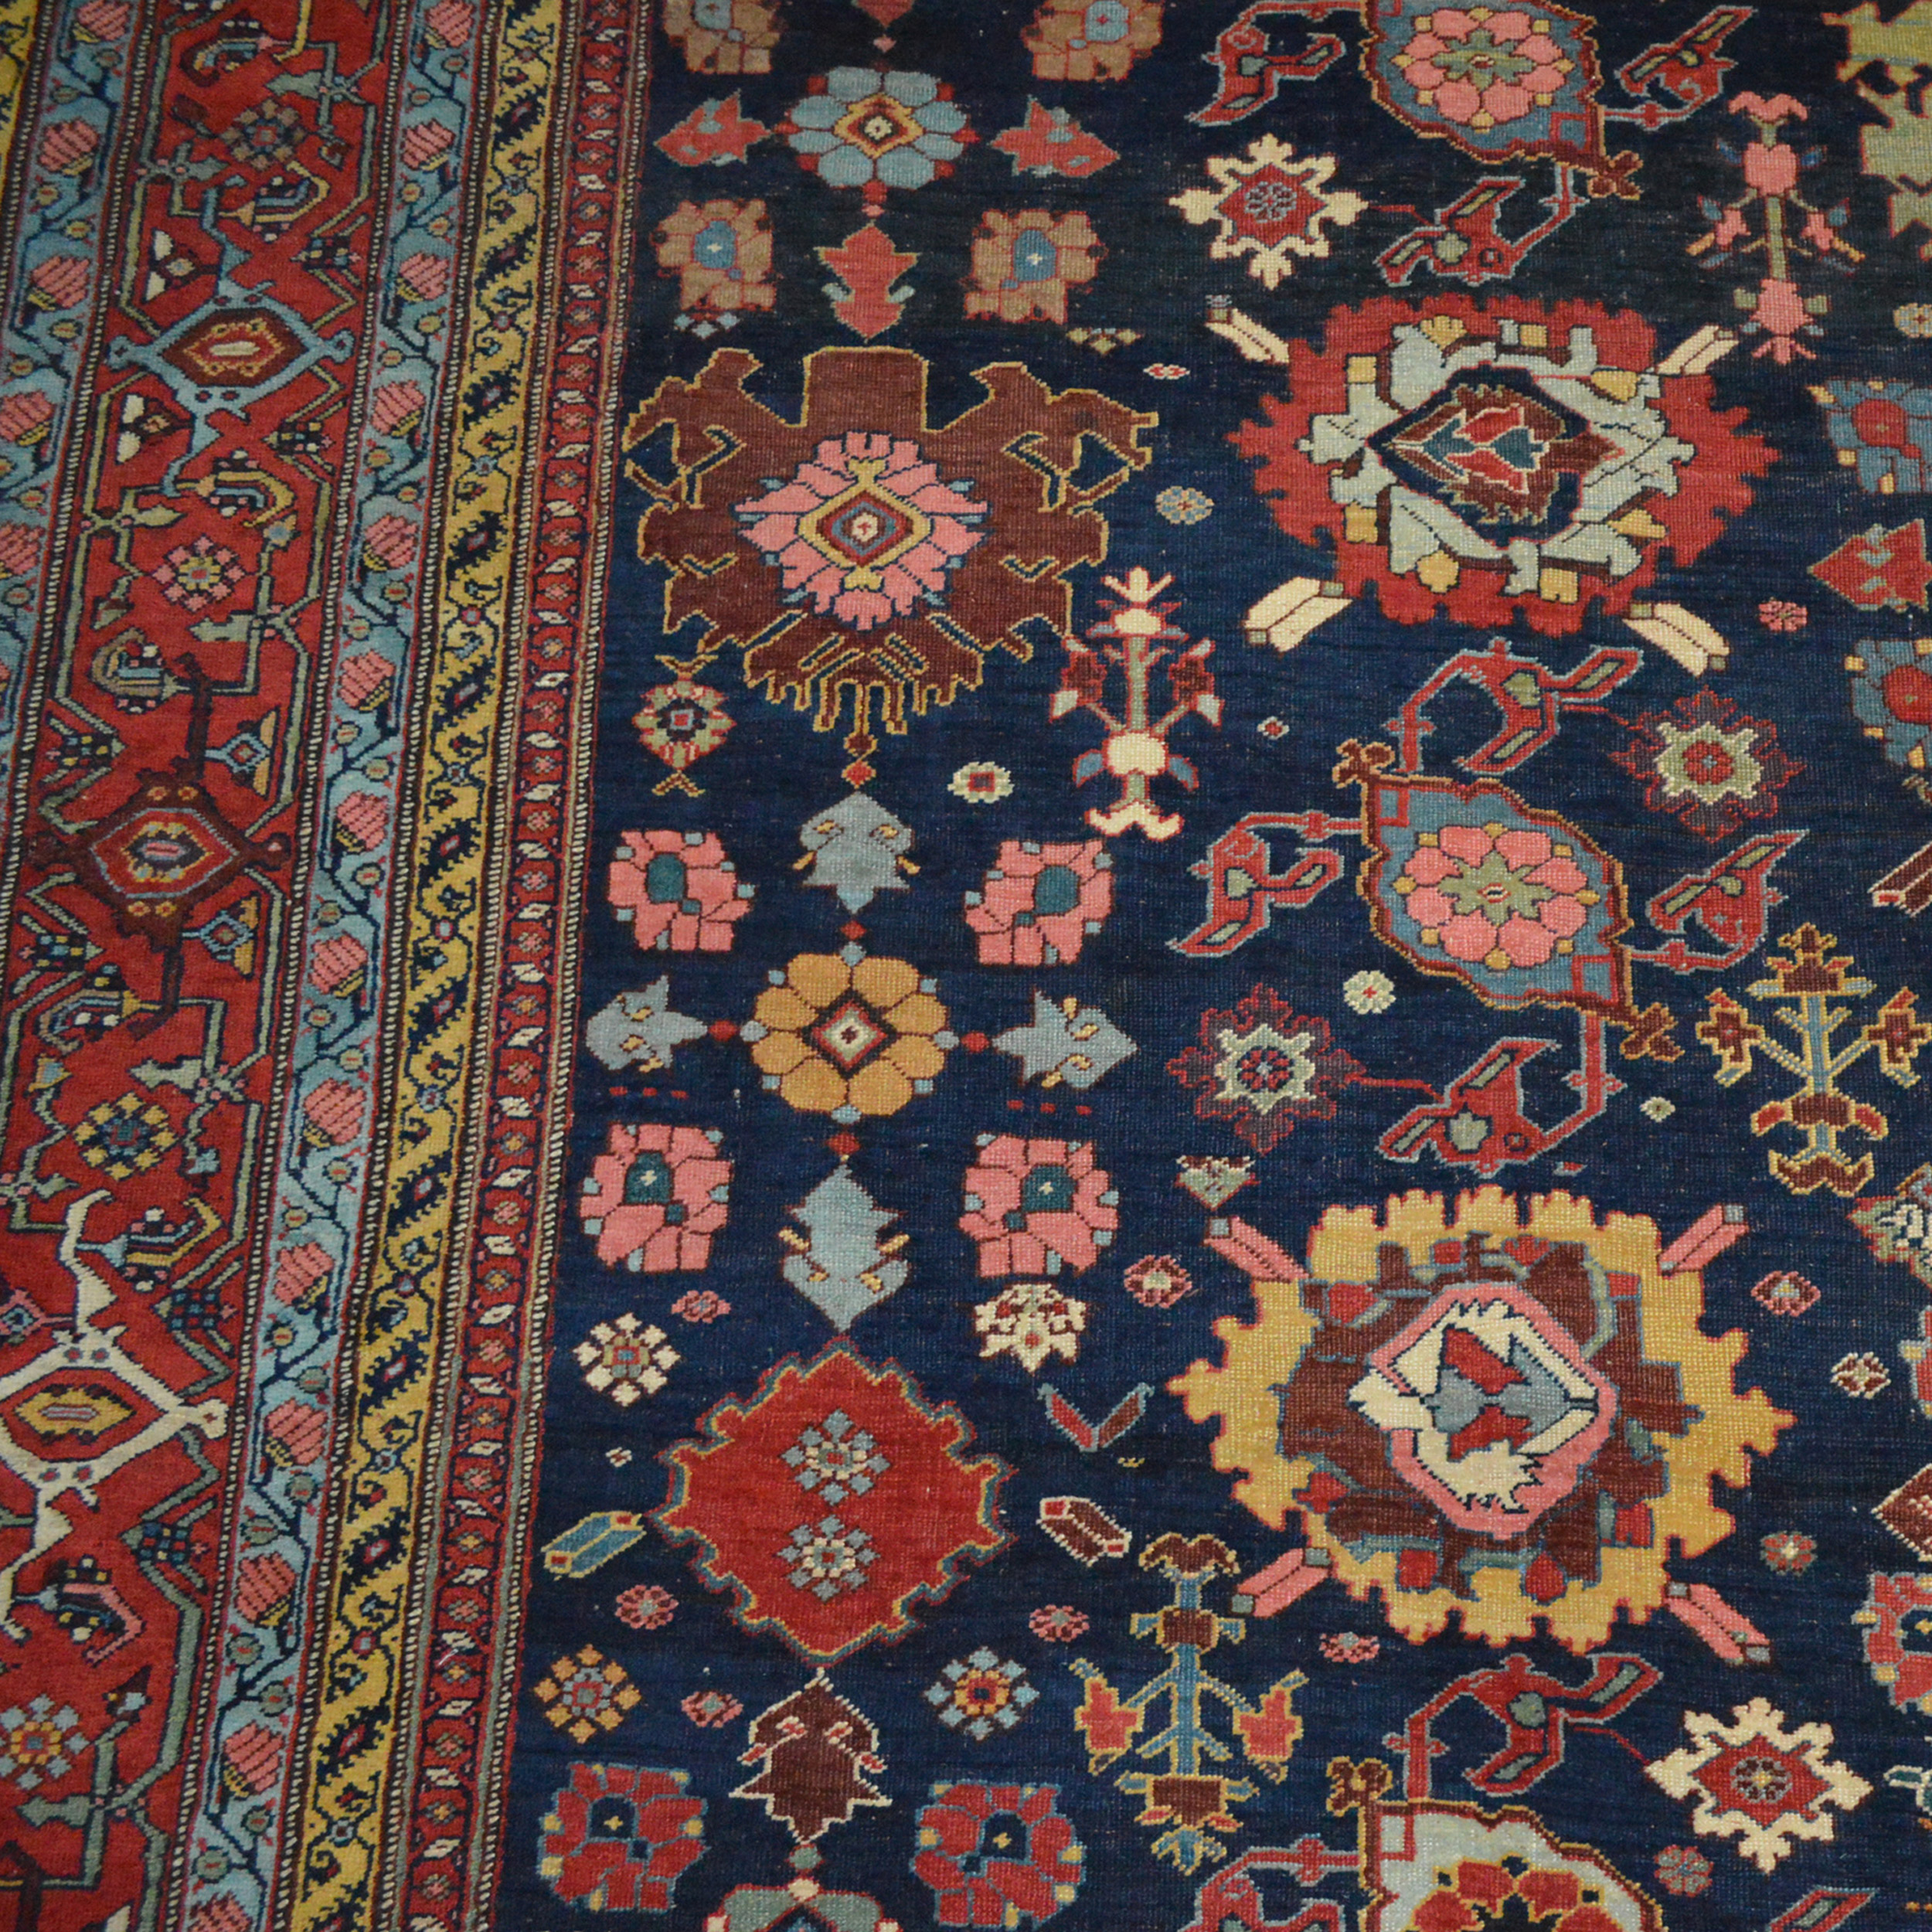 Detail of an antique Persian Bidjar carpet with the classic Harshang design of various palmettes and flowers on a navy blue field, circa 1880. Douglas Stock Gallery is one of America's most selective dealers in antique Persian carpets and other types of antique Oriental rugs, Boston,MA area, South Natick,MA - We work with individual clients, architects and interior designers looking for high quality antique Oriental rugs and offer nationwide shipping.